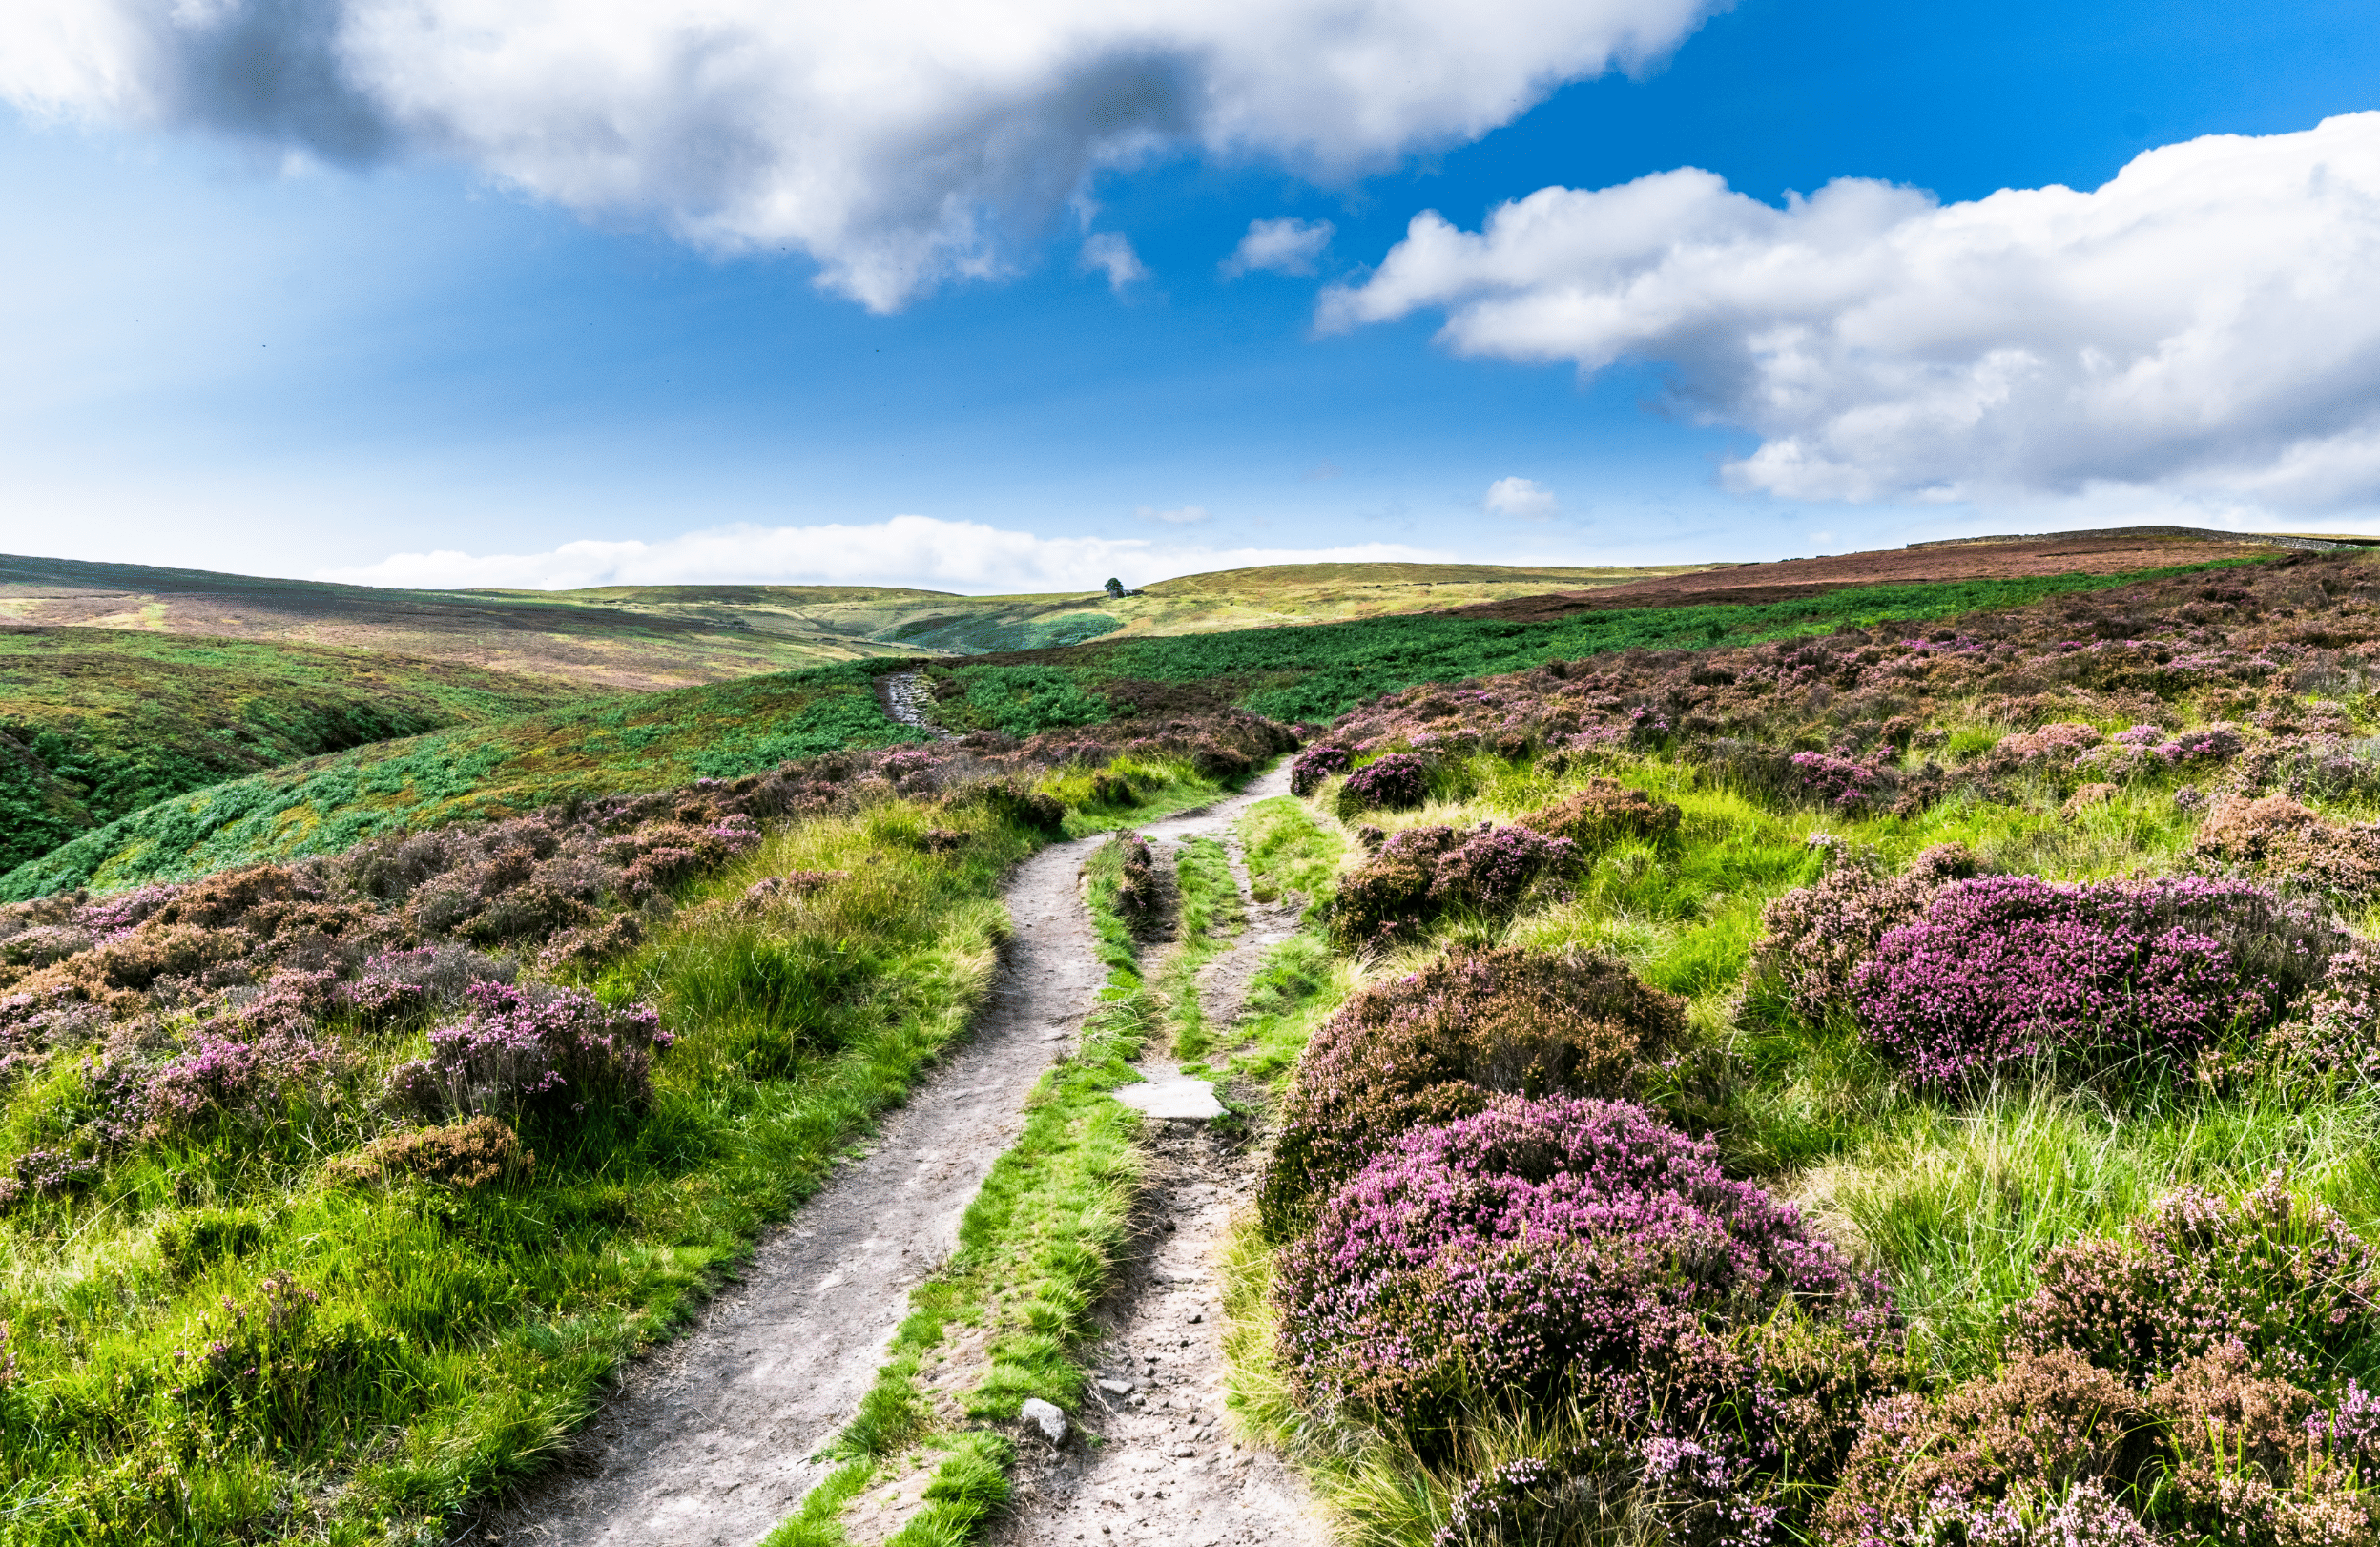 Uncover the Bronte Sisters’ Yorkshire with a Day Trip to Haworth